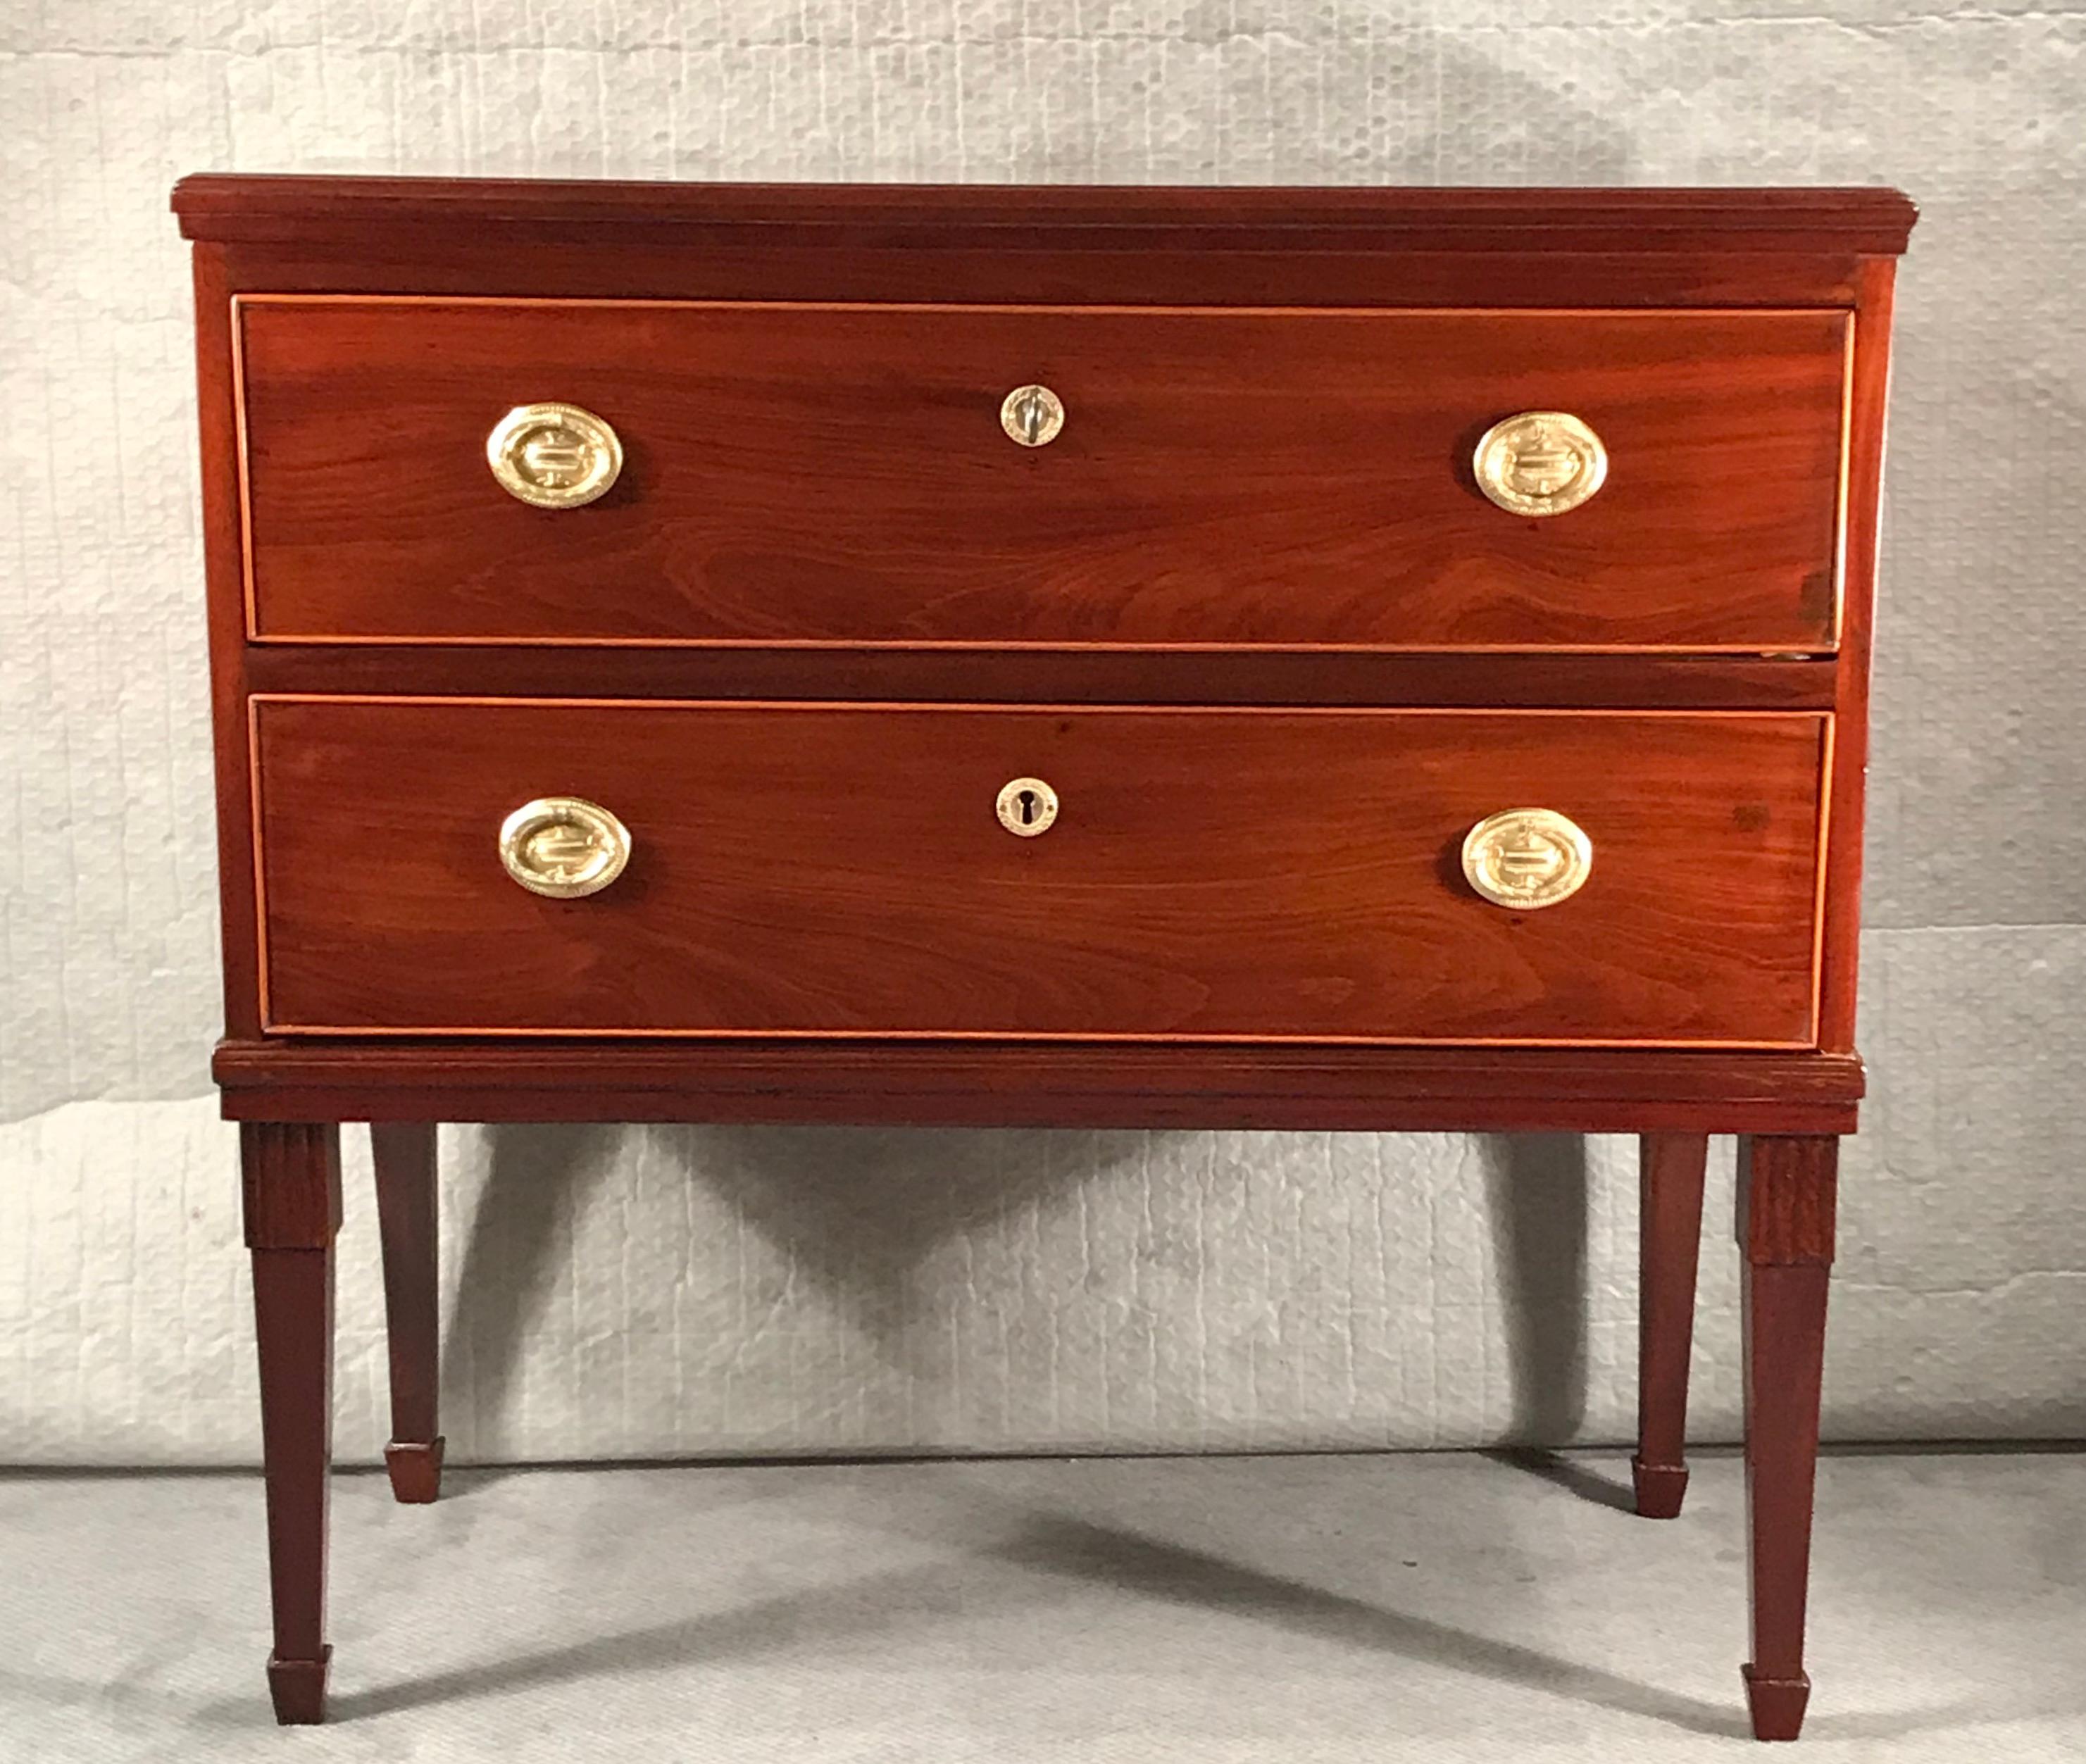 Neoclassical dresser, Northern Germany, 1800.
This elegant dresser has an exquisite mahogany veneer. It stands on four slender legs and has two spacious drawers. The top is additionally decorated with a satinwood inlay. This chest of drawers would